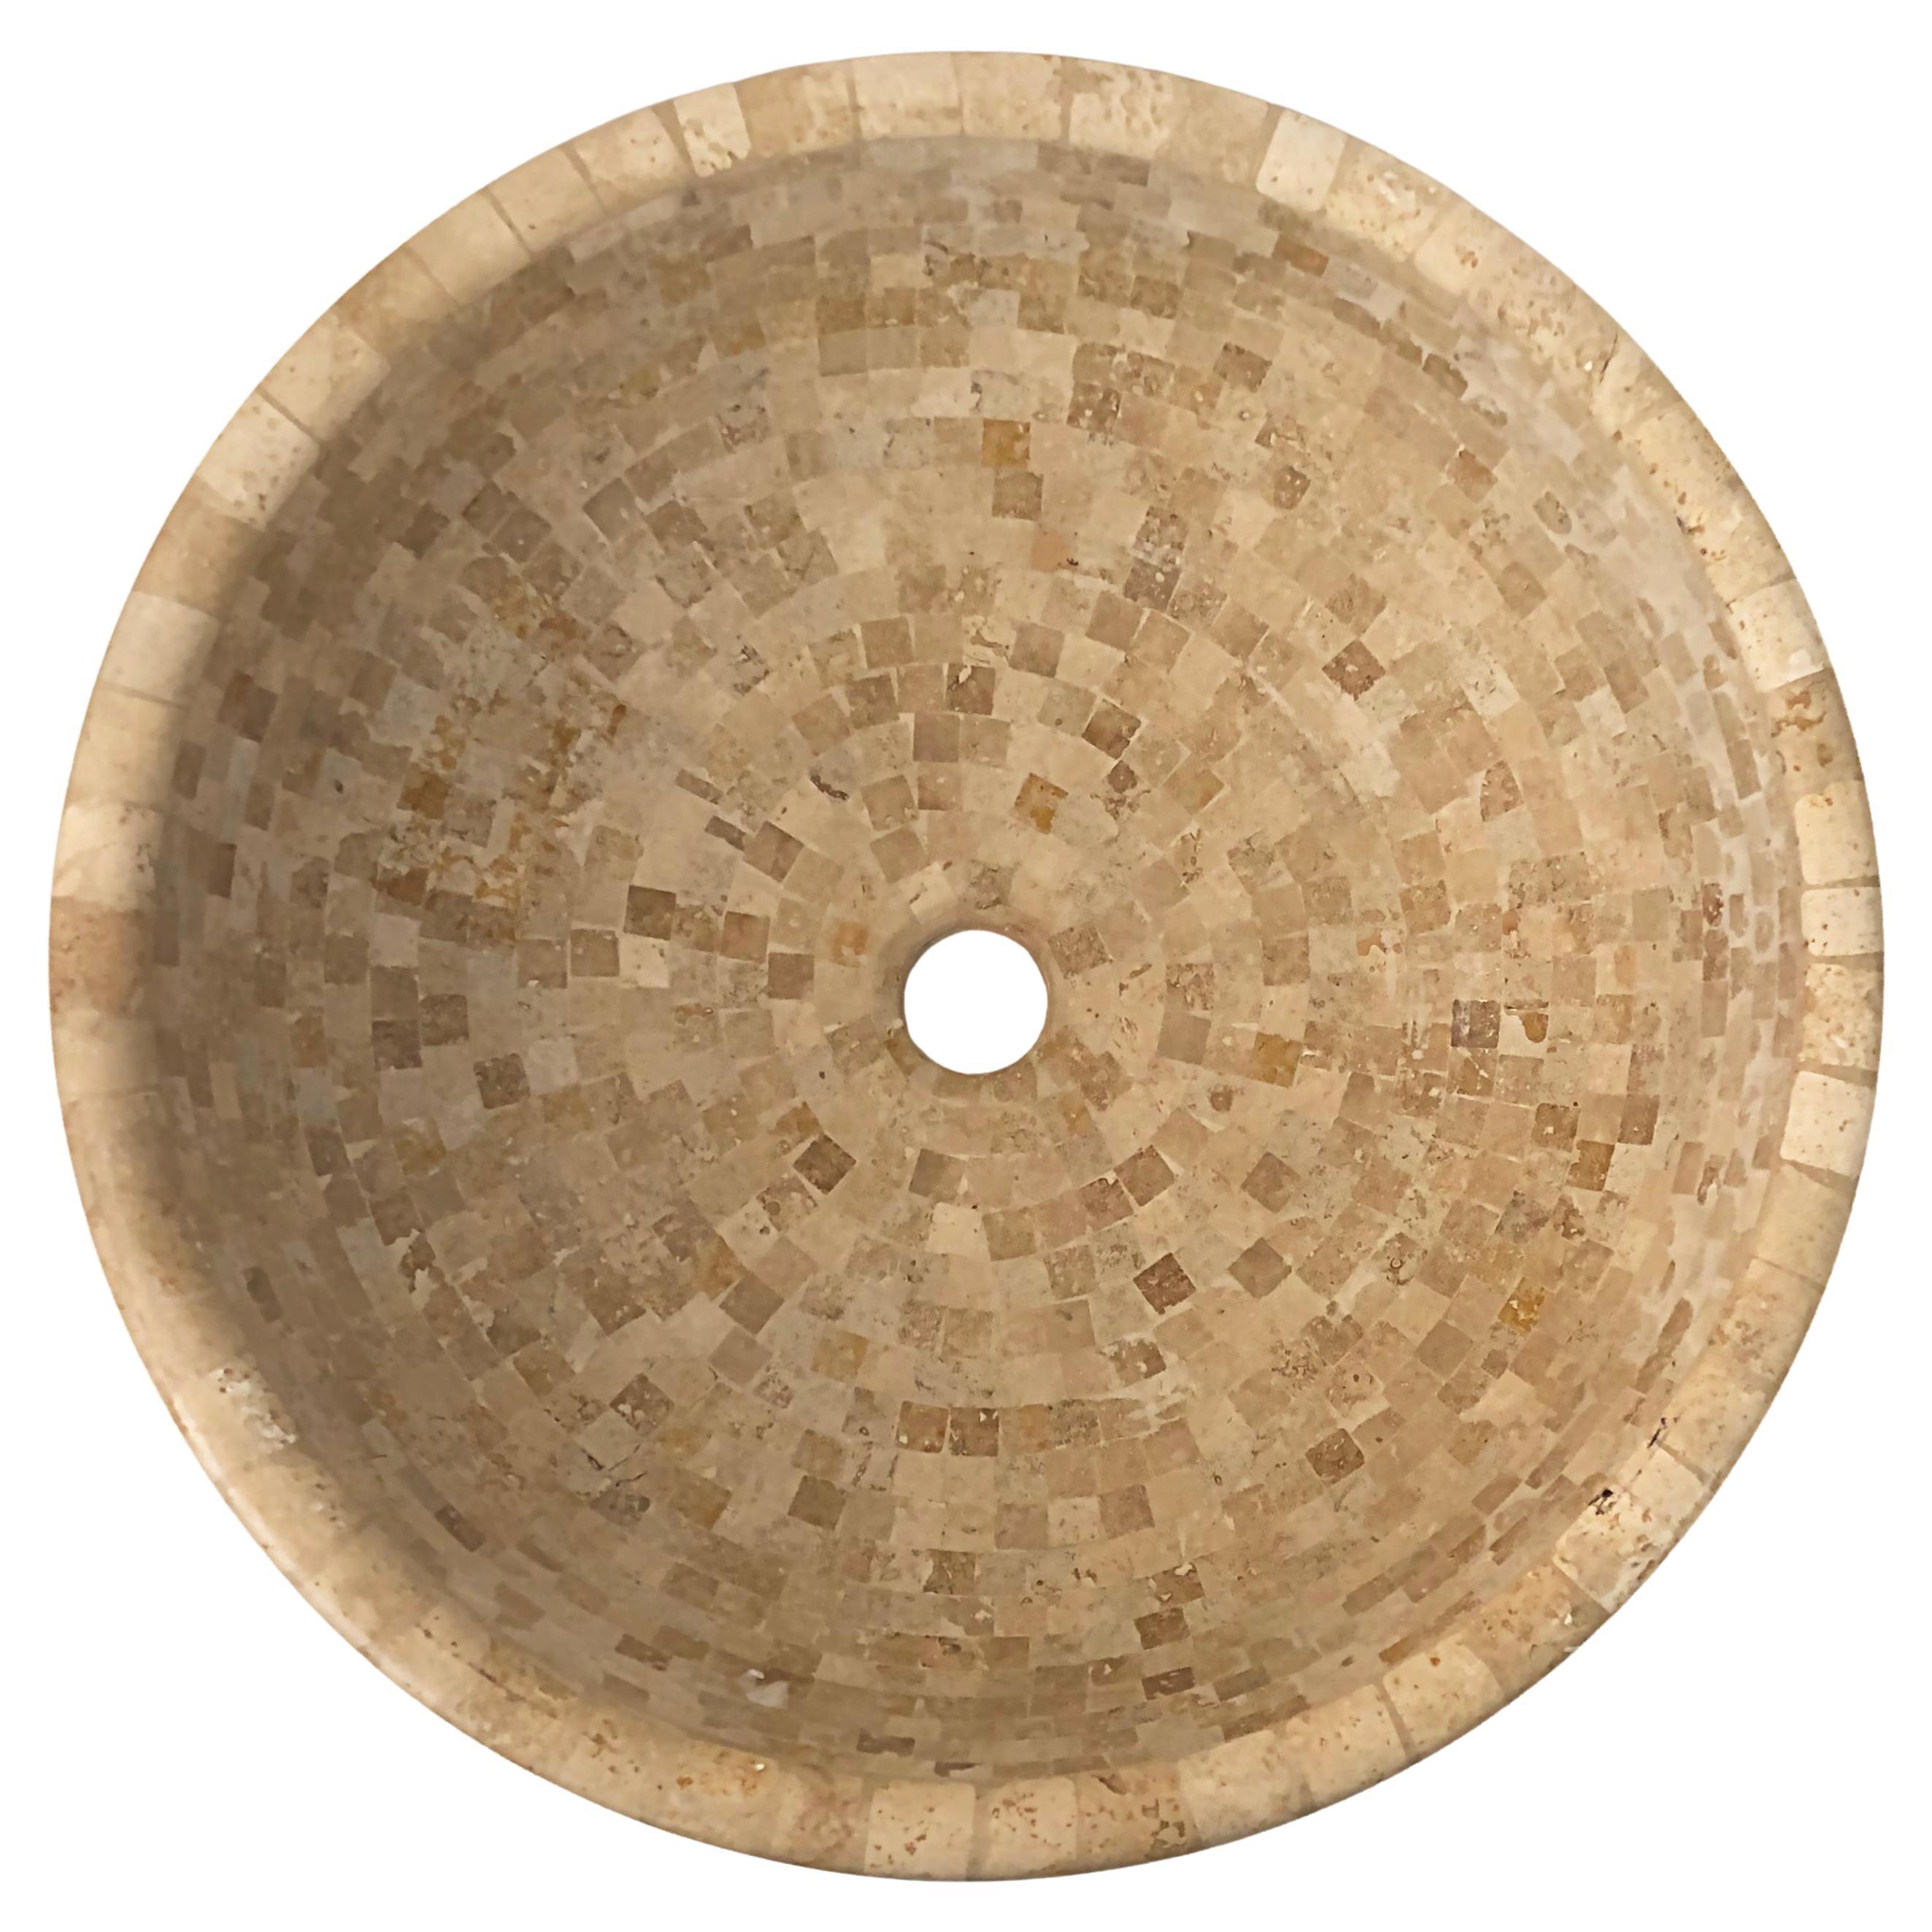 Tessellated Travertine Mosaic round sink vessel, 21st-century

Offered for sale is a 21st-century tessellated travertine sink vessel to install above a bathroom counter. The vessel is created from tessellated mosaic pieces of travertine that